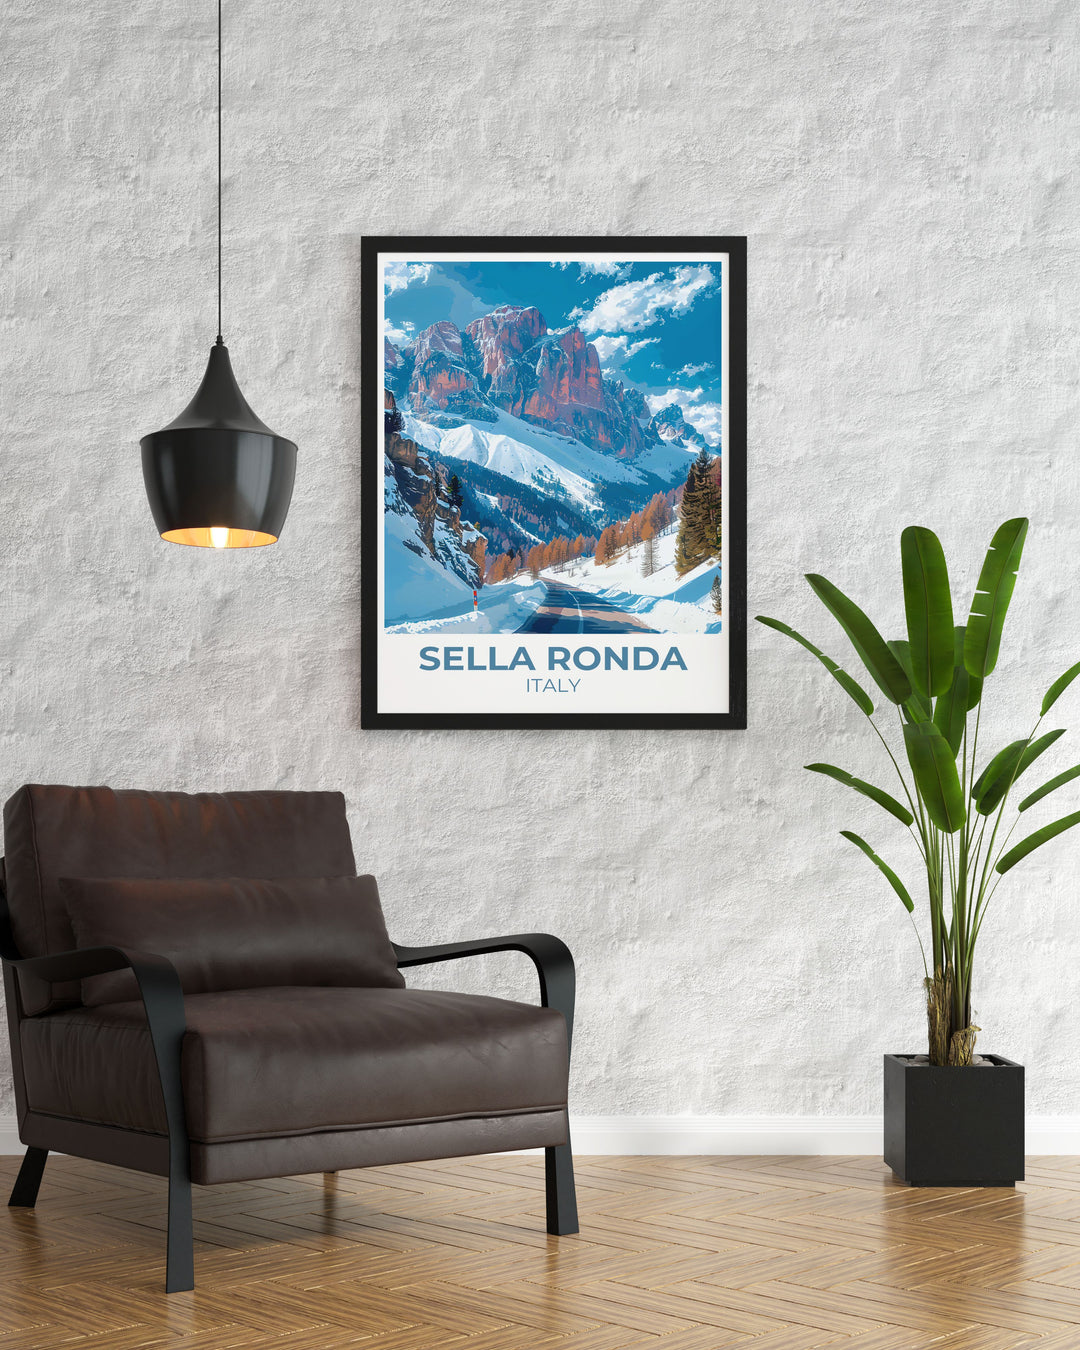 Italy Vintage Posters capturing the captivating landscapes and vibrant culture of the Dolomites, ideal for bringing the spirit of the Italian Alps into your home.